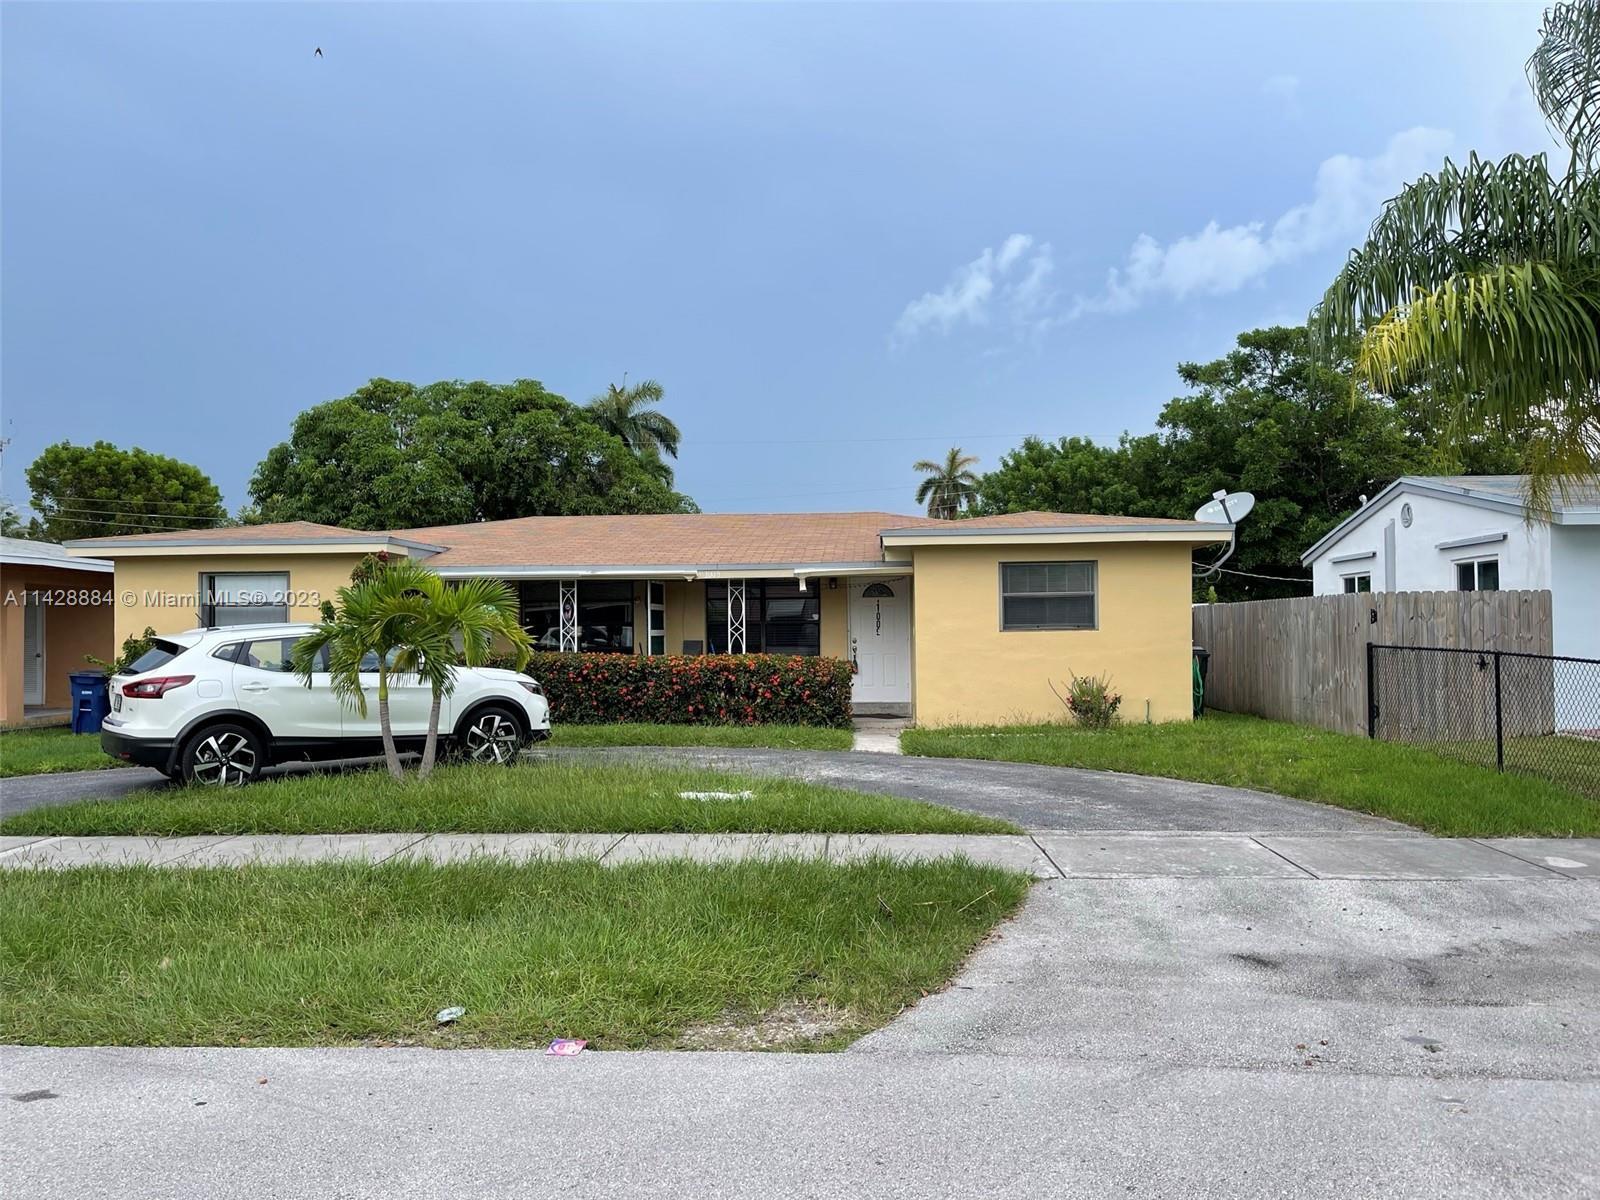 2/2 each side duplex with pool on eastside of US1 in HALLANDALE BEACH! Ready for new owner live one 